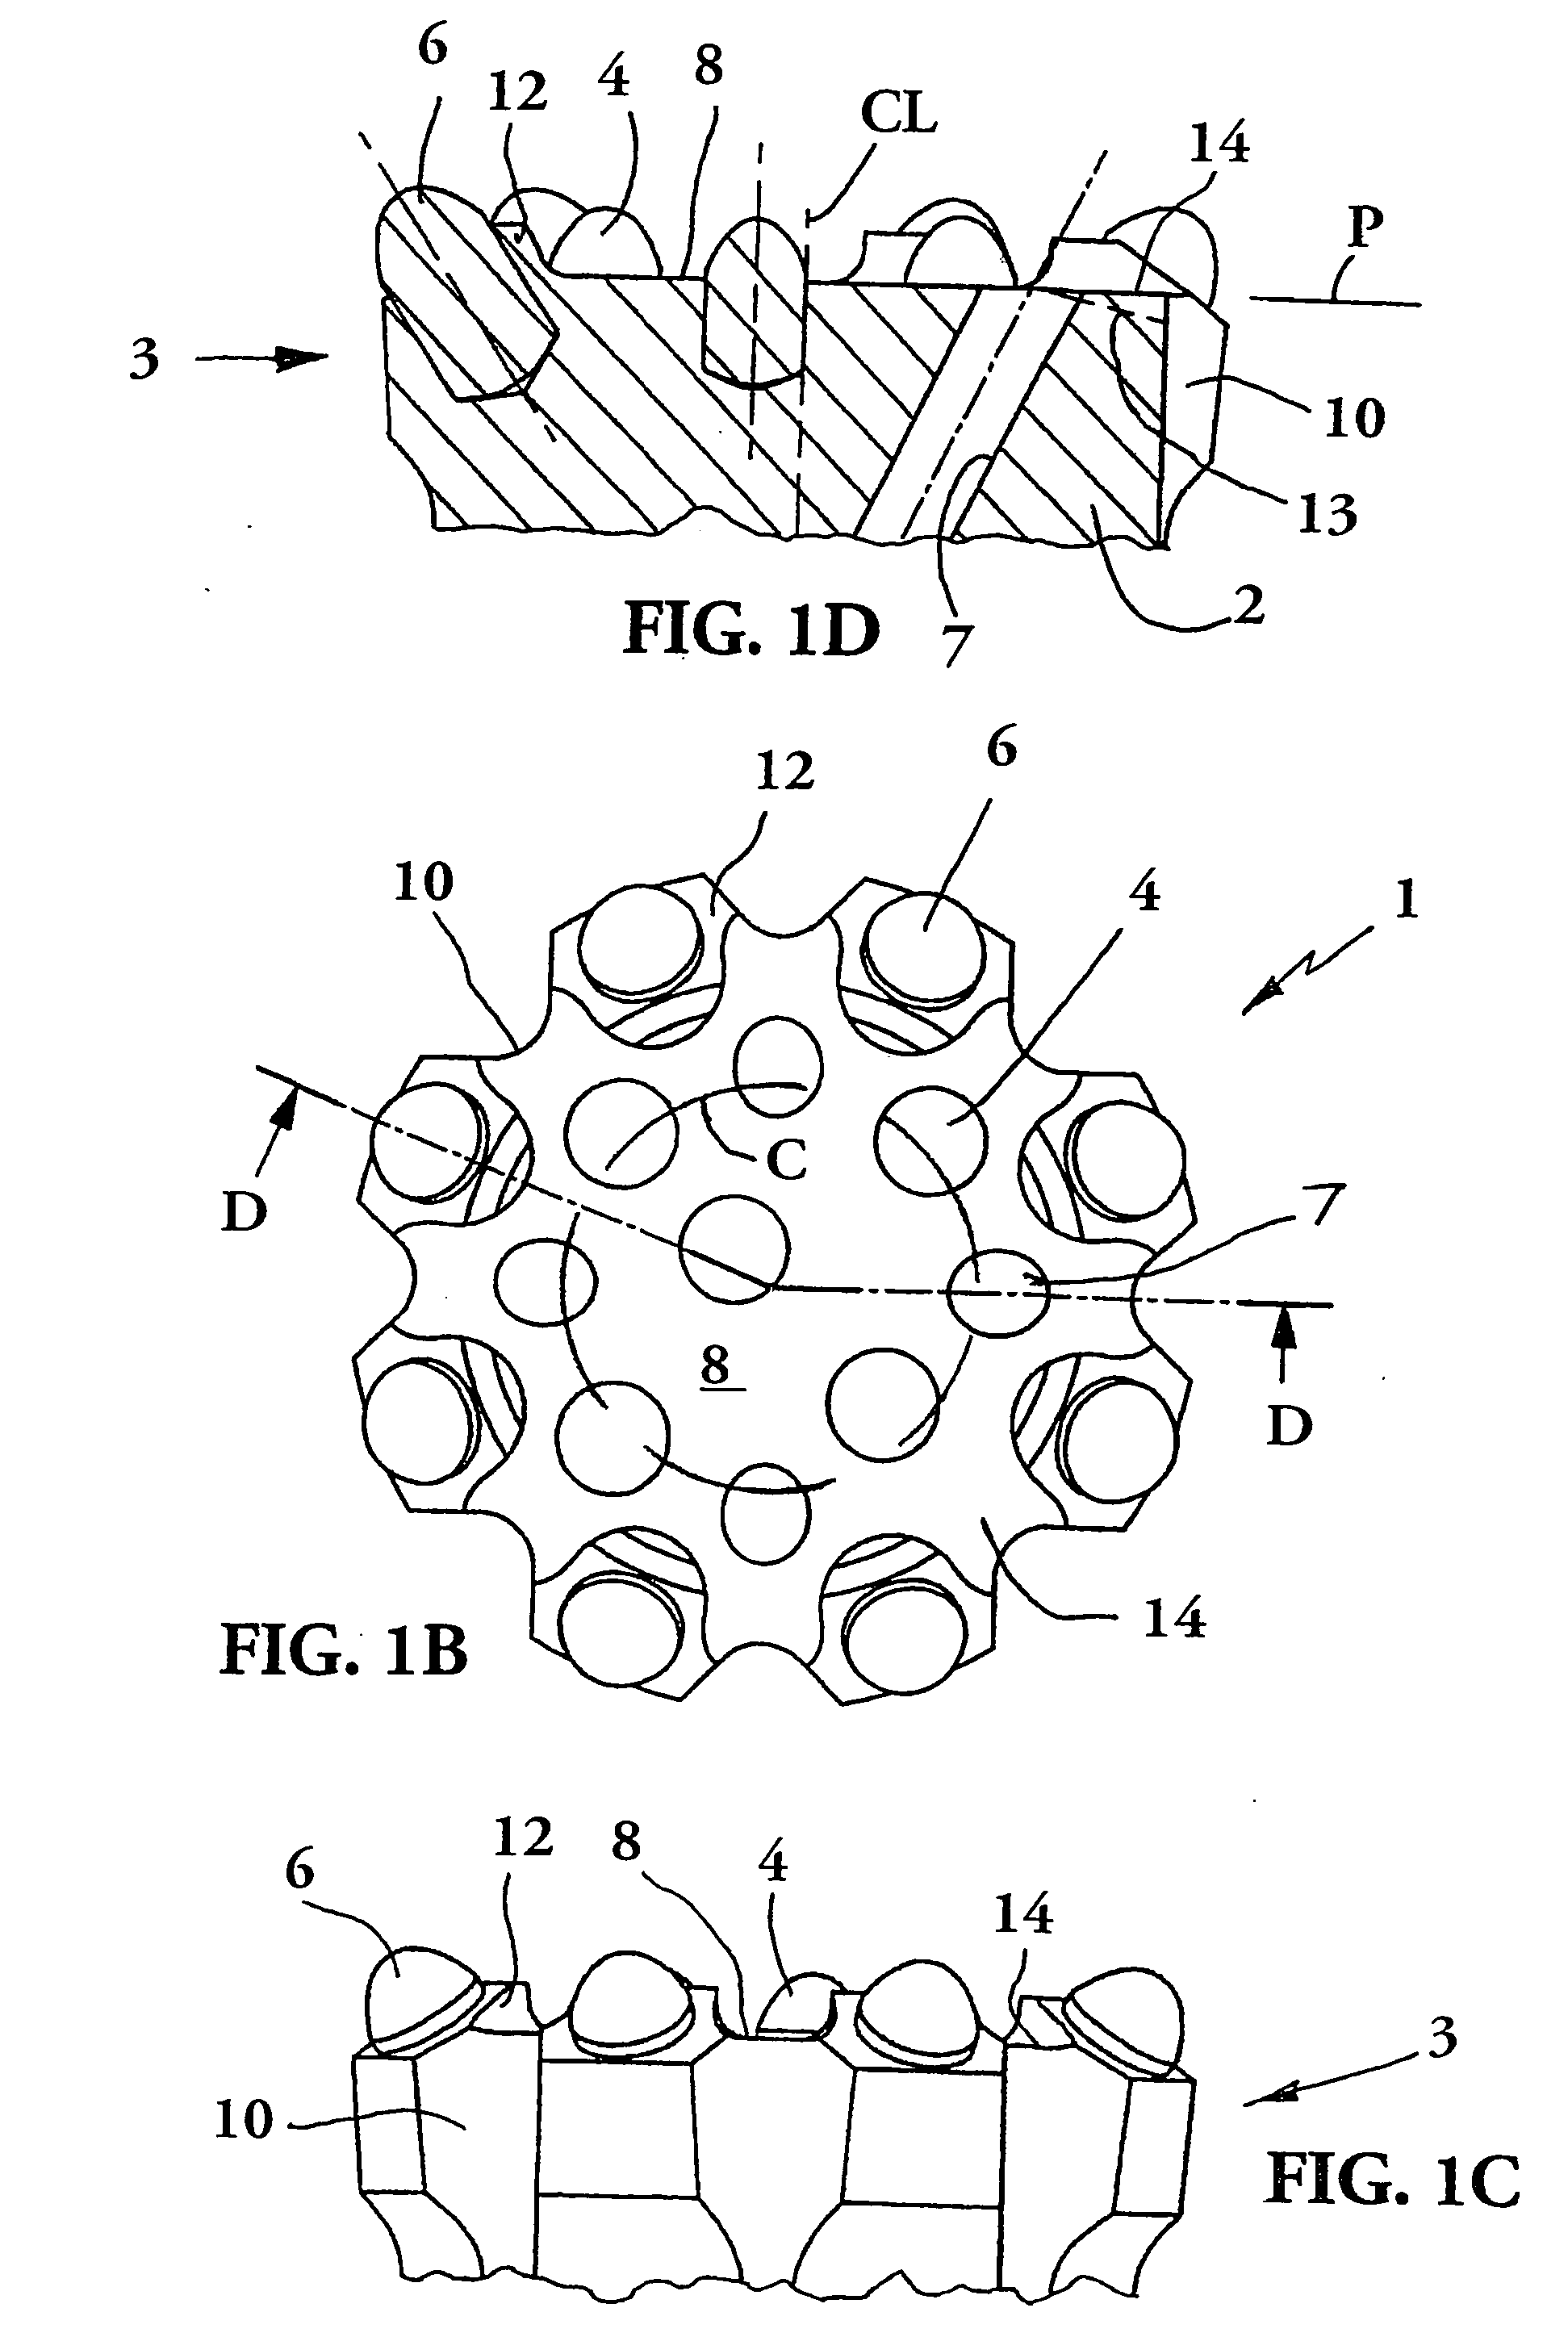 Rock drill bit having outer and inner rock-crushing buttons